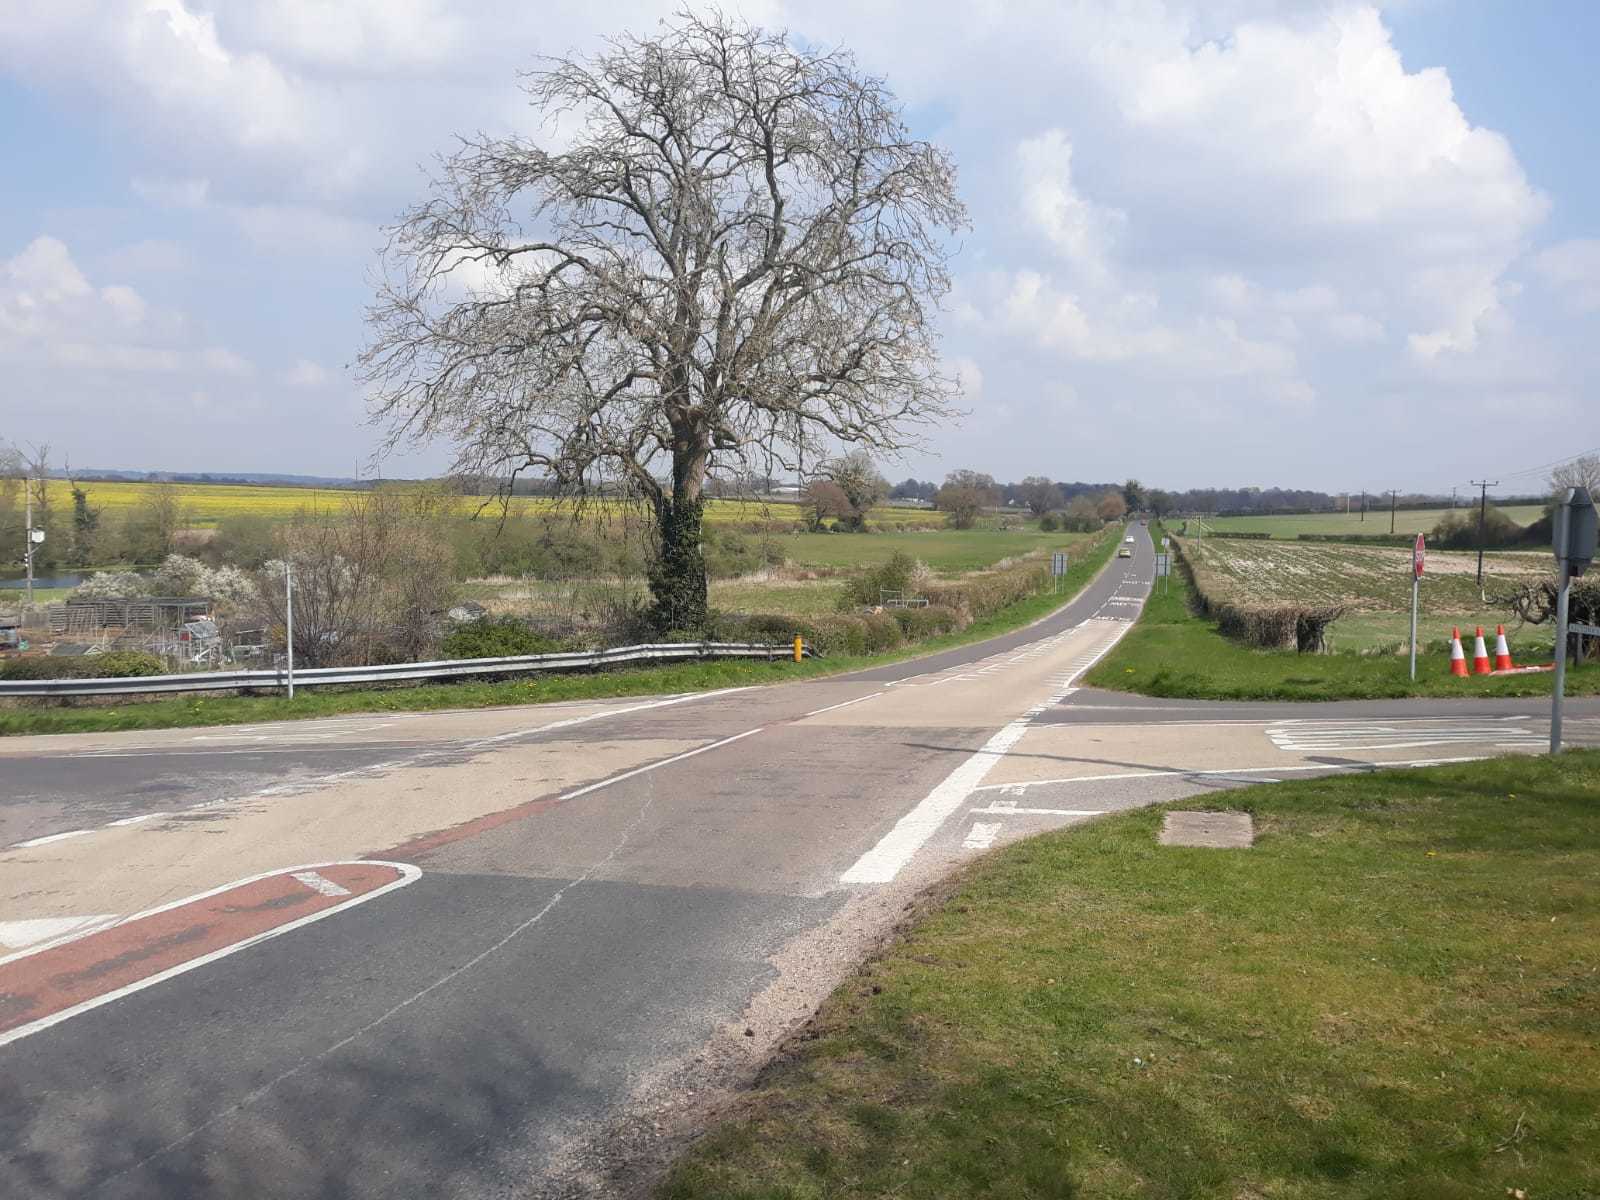 Foxcotte Road, where Alex Sartain was tracked by police helicopter